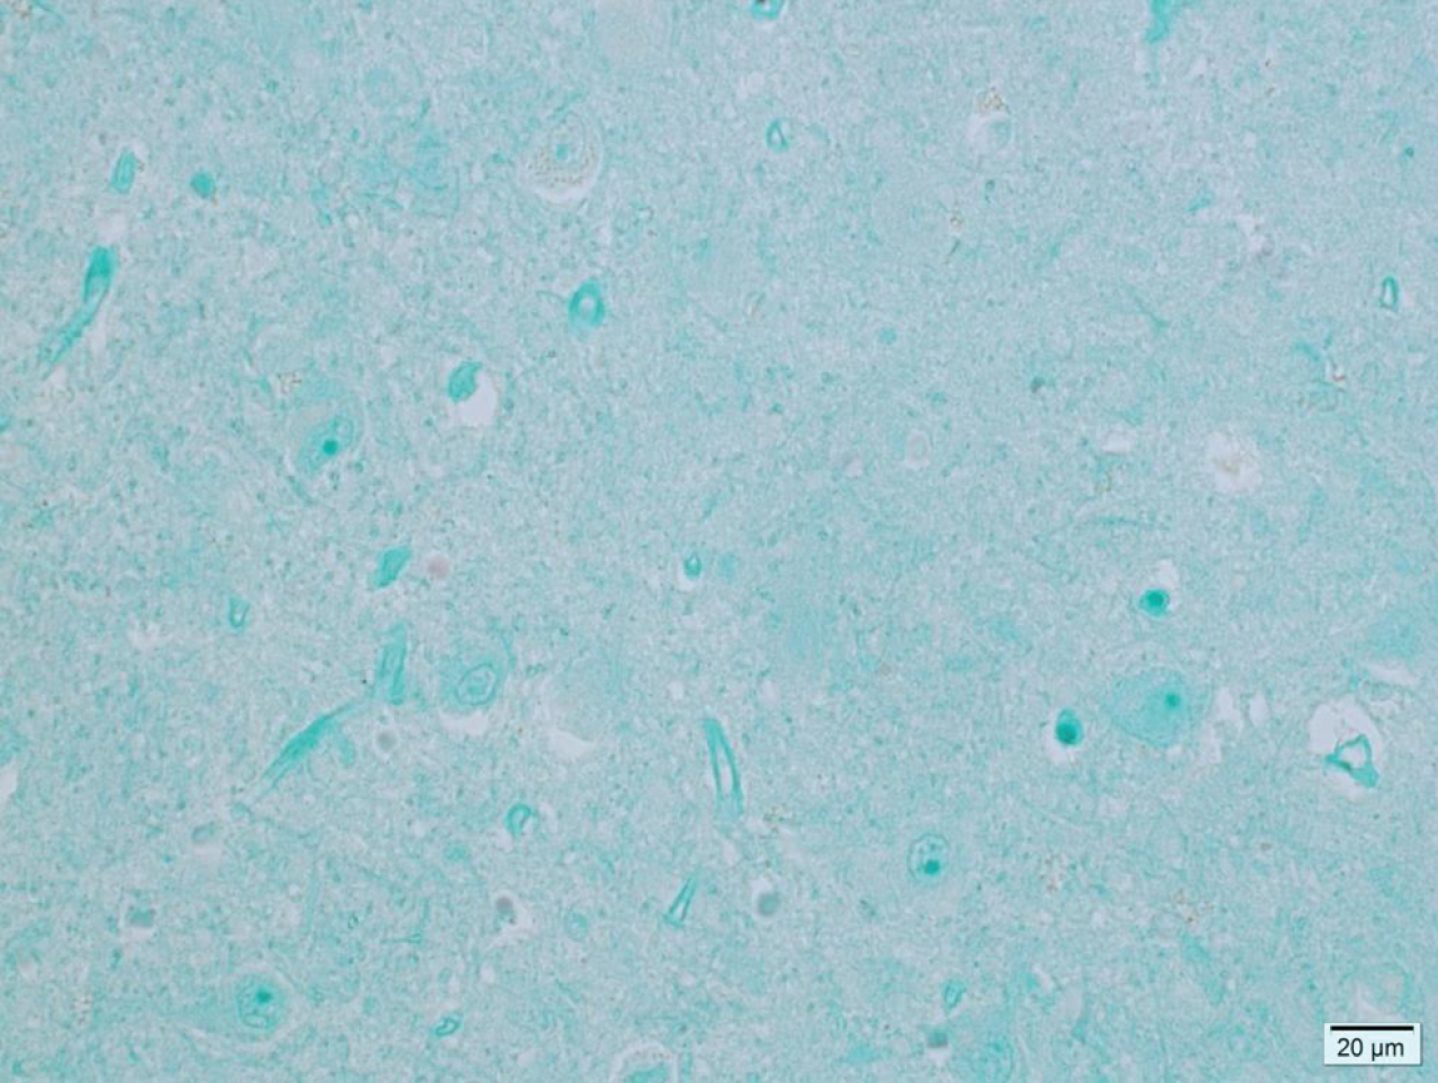 Microphotograph of formalin-fixed hippocampus tissue from a 78-year-old control patient showing no viral antigen staining.